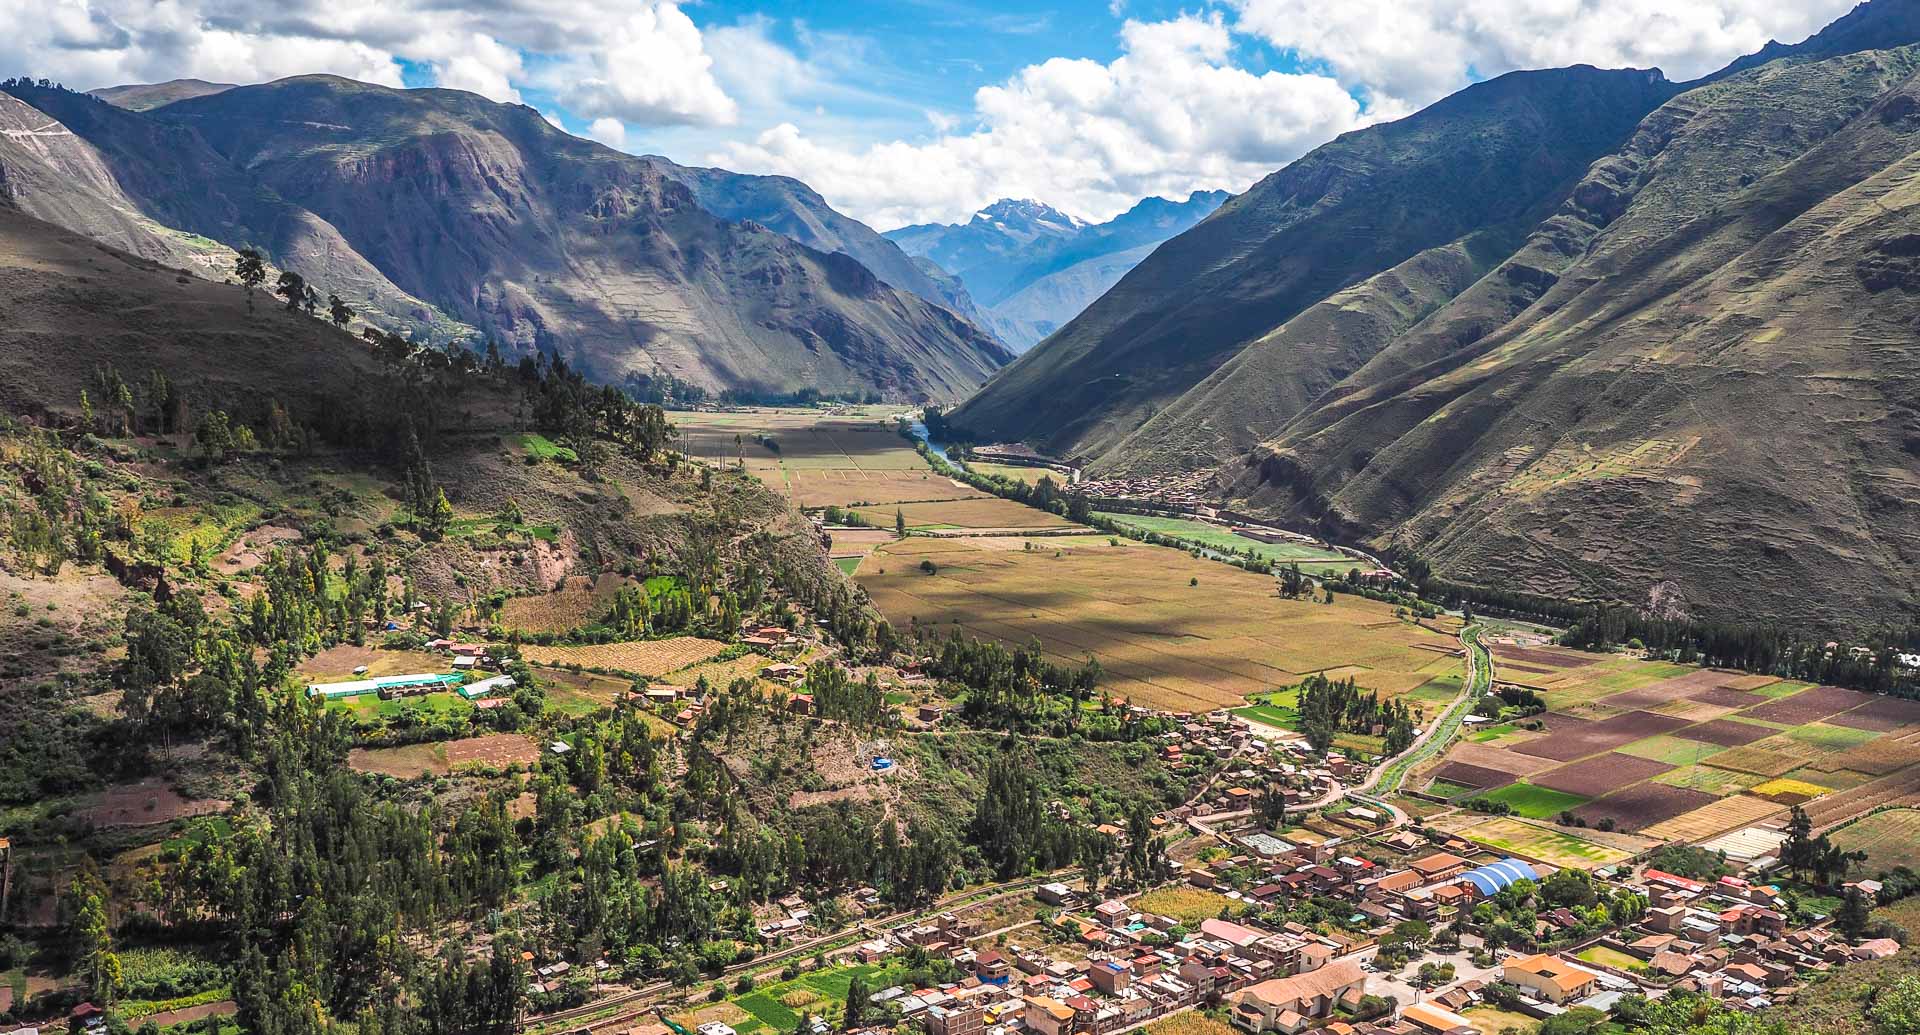 A guide to Peru's Sacred Valley